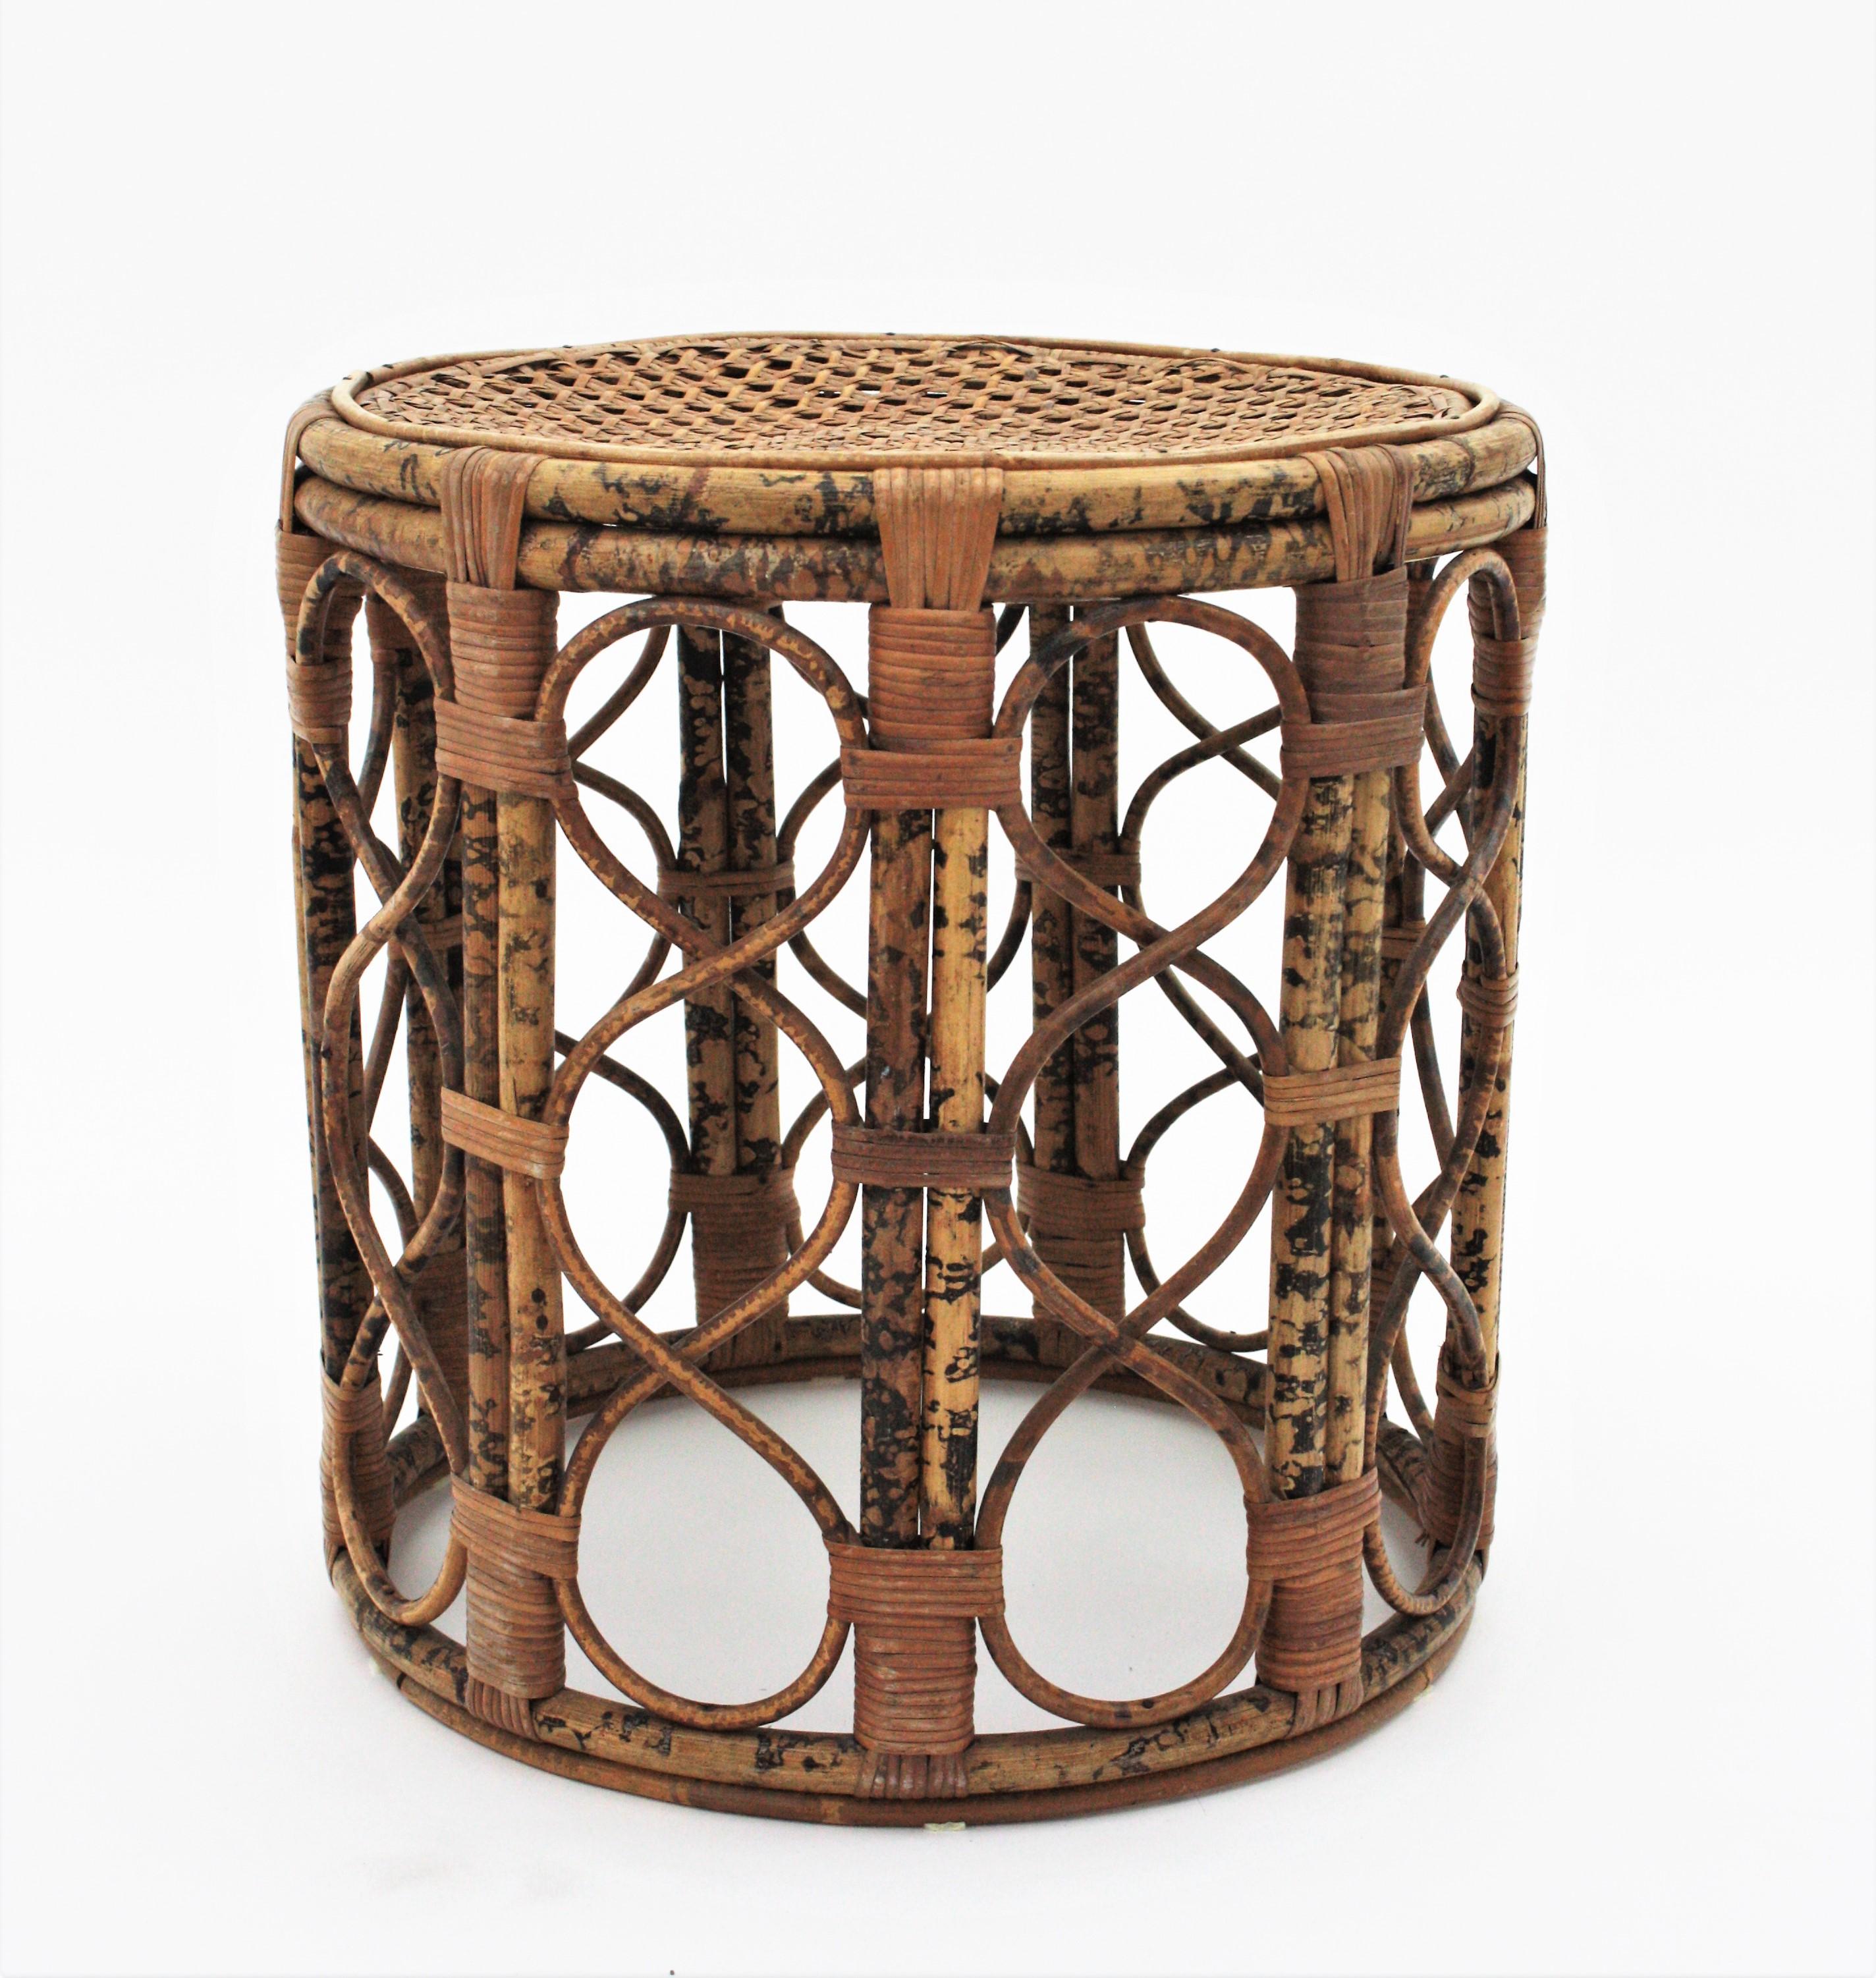 French Side Table or Stool in Tiger Bamboo Rattan with Woven Wicker Top, 1940s For Sale 4